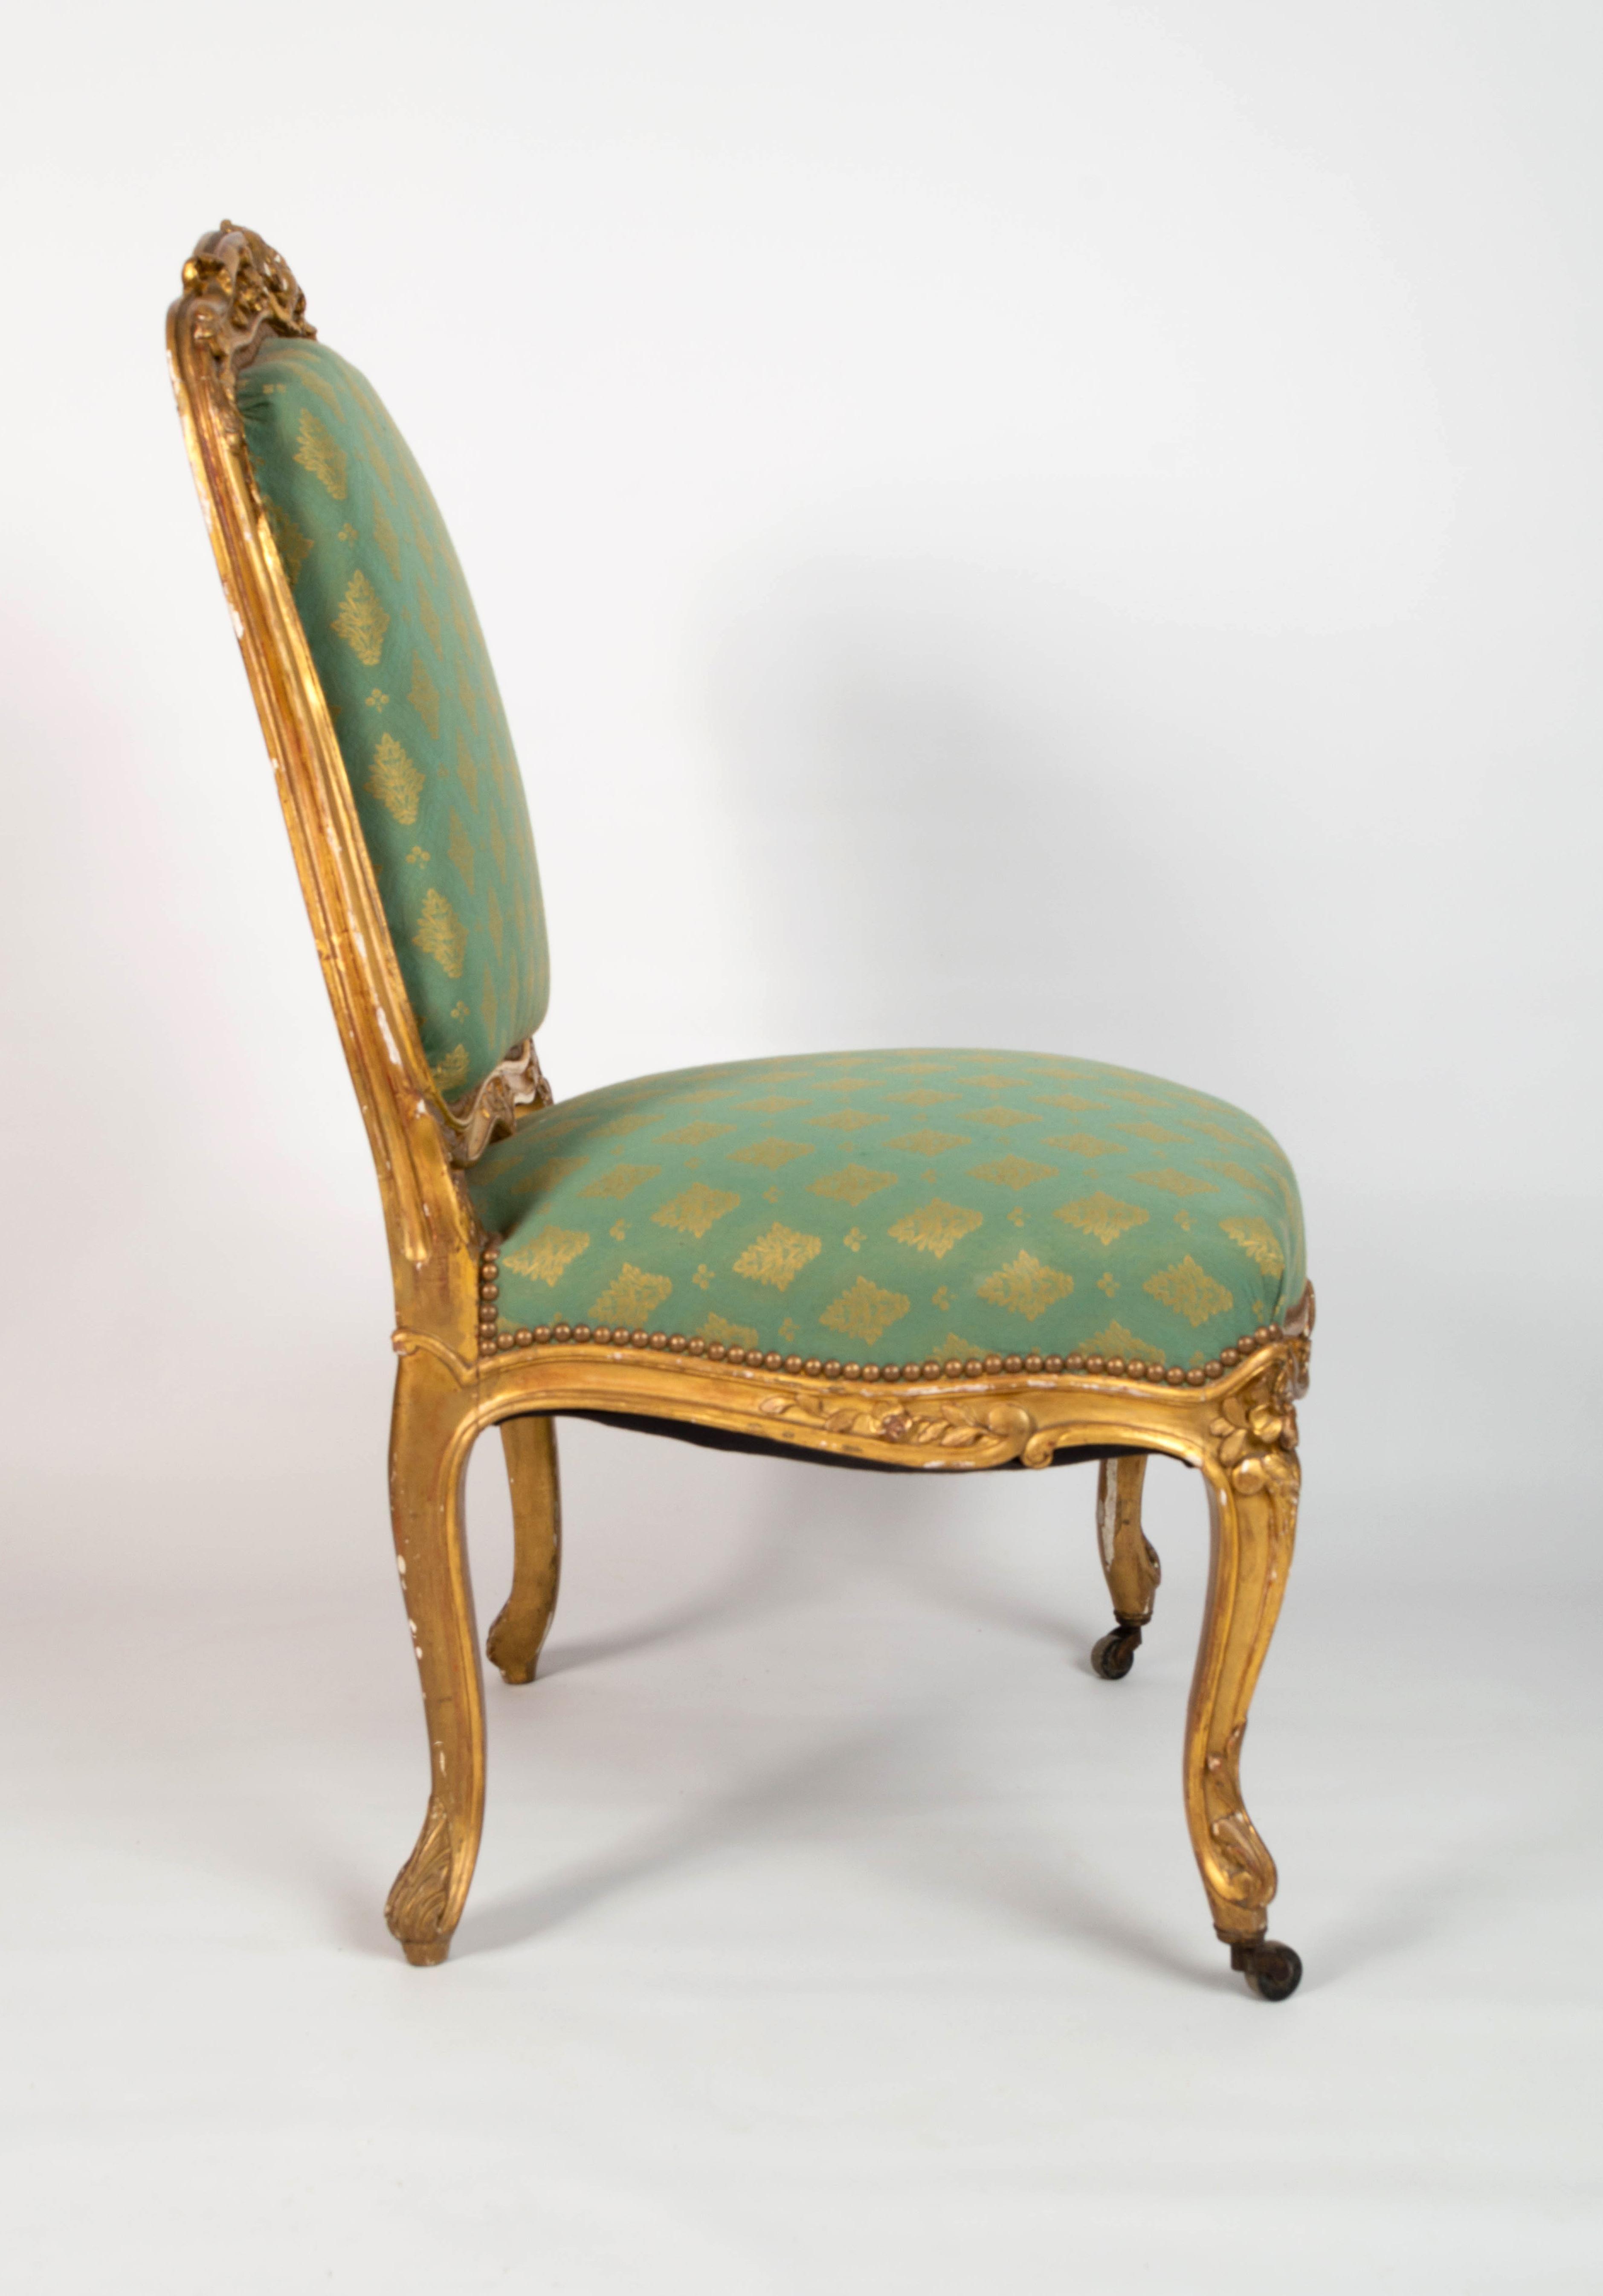 Pair Antique French 19th Century Louis XV Style Giltwood Salon Chairs C.1870 For Sale 10